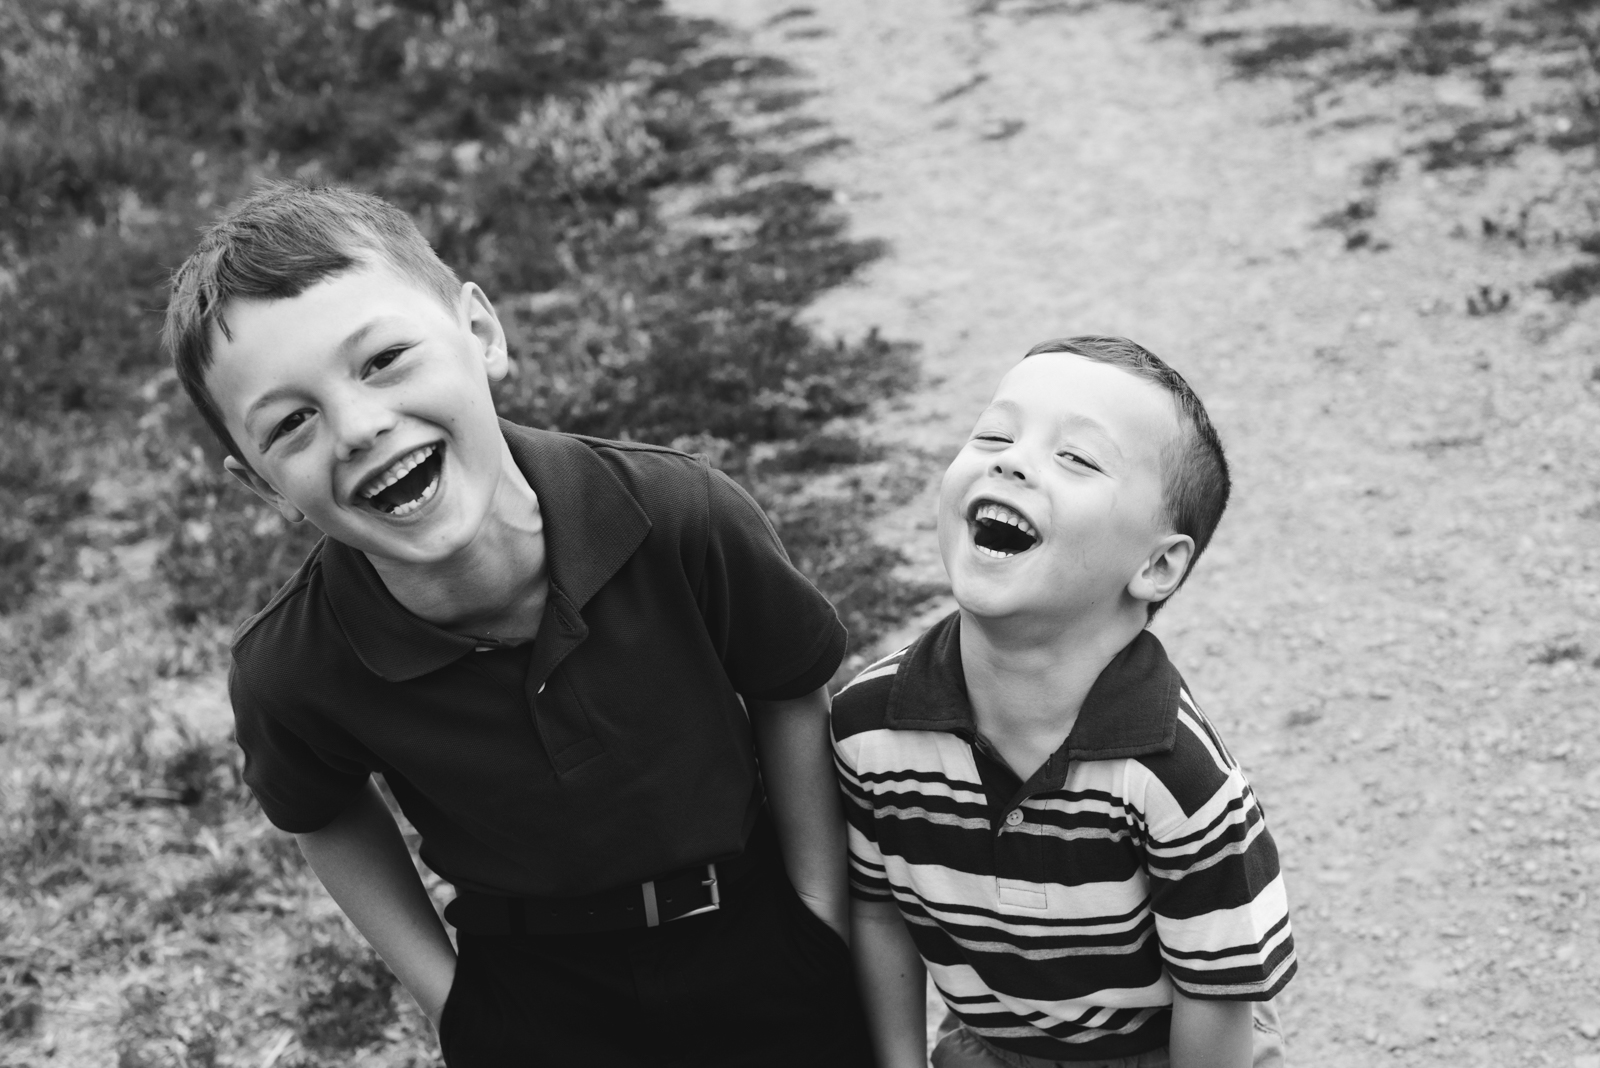 brothers laughing hysterically together looking at the camera